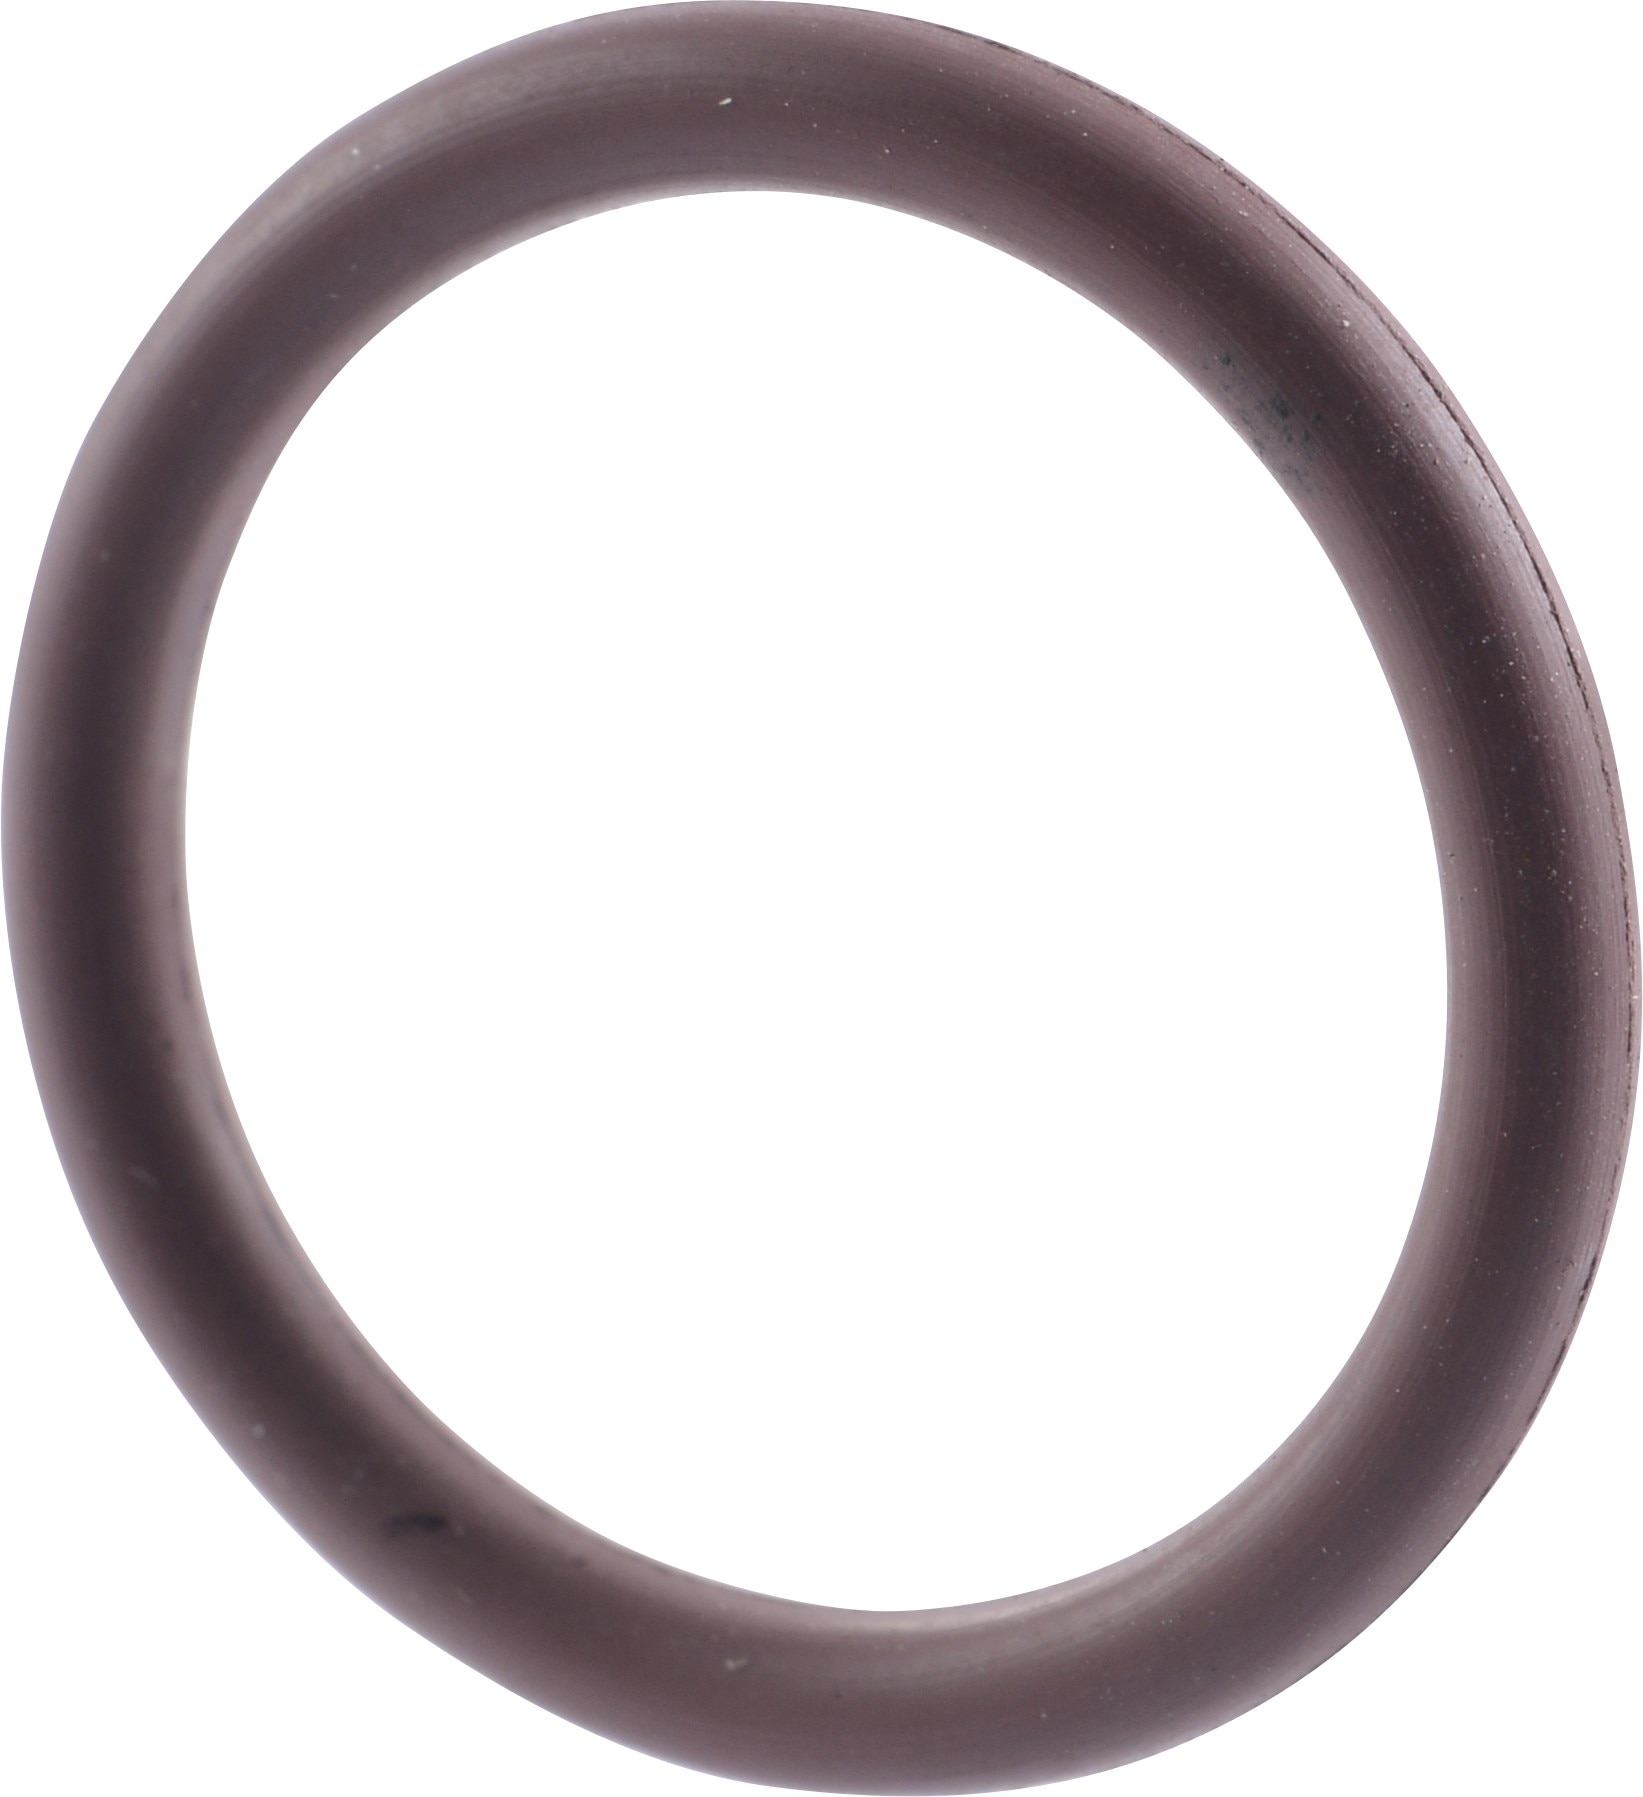 O-RING,3-908,-15F TO 400F